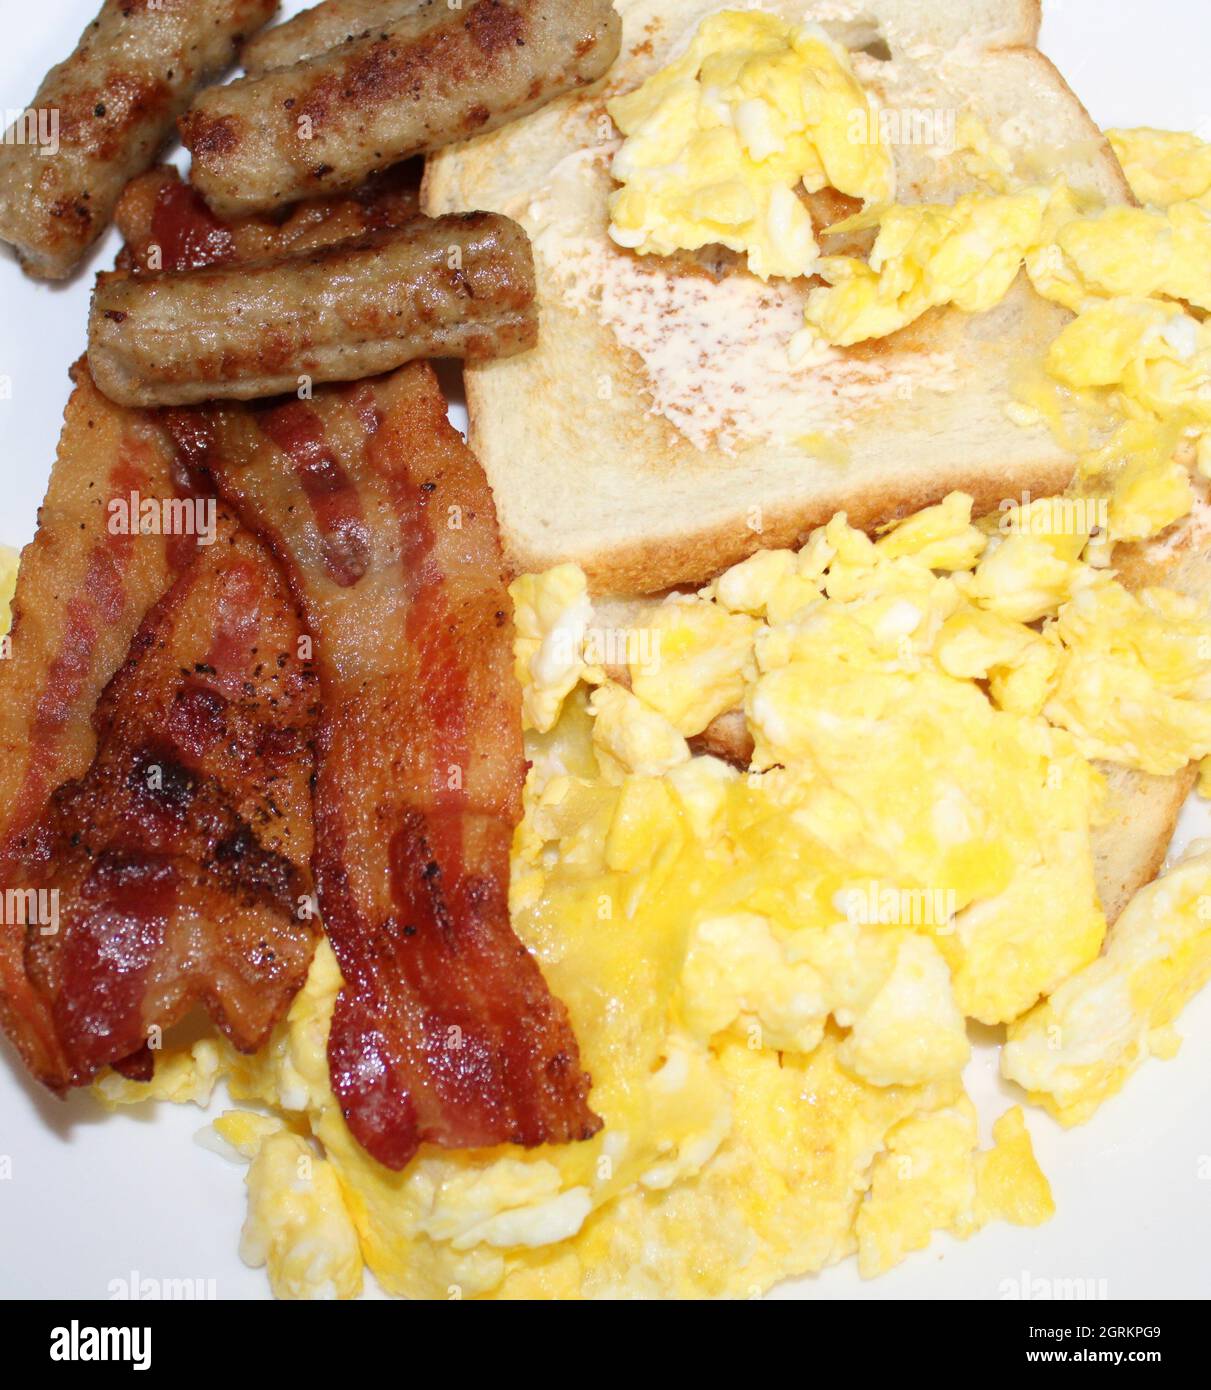 Delicious breakfast consisting of bacon, sausage, eggs and toast. Stock Photo